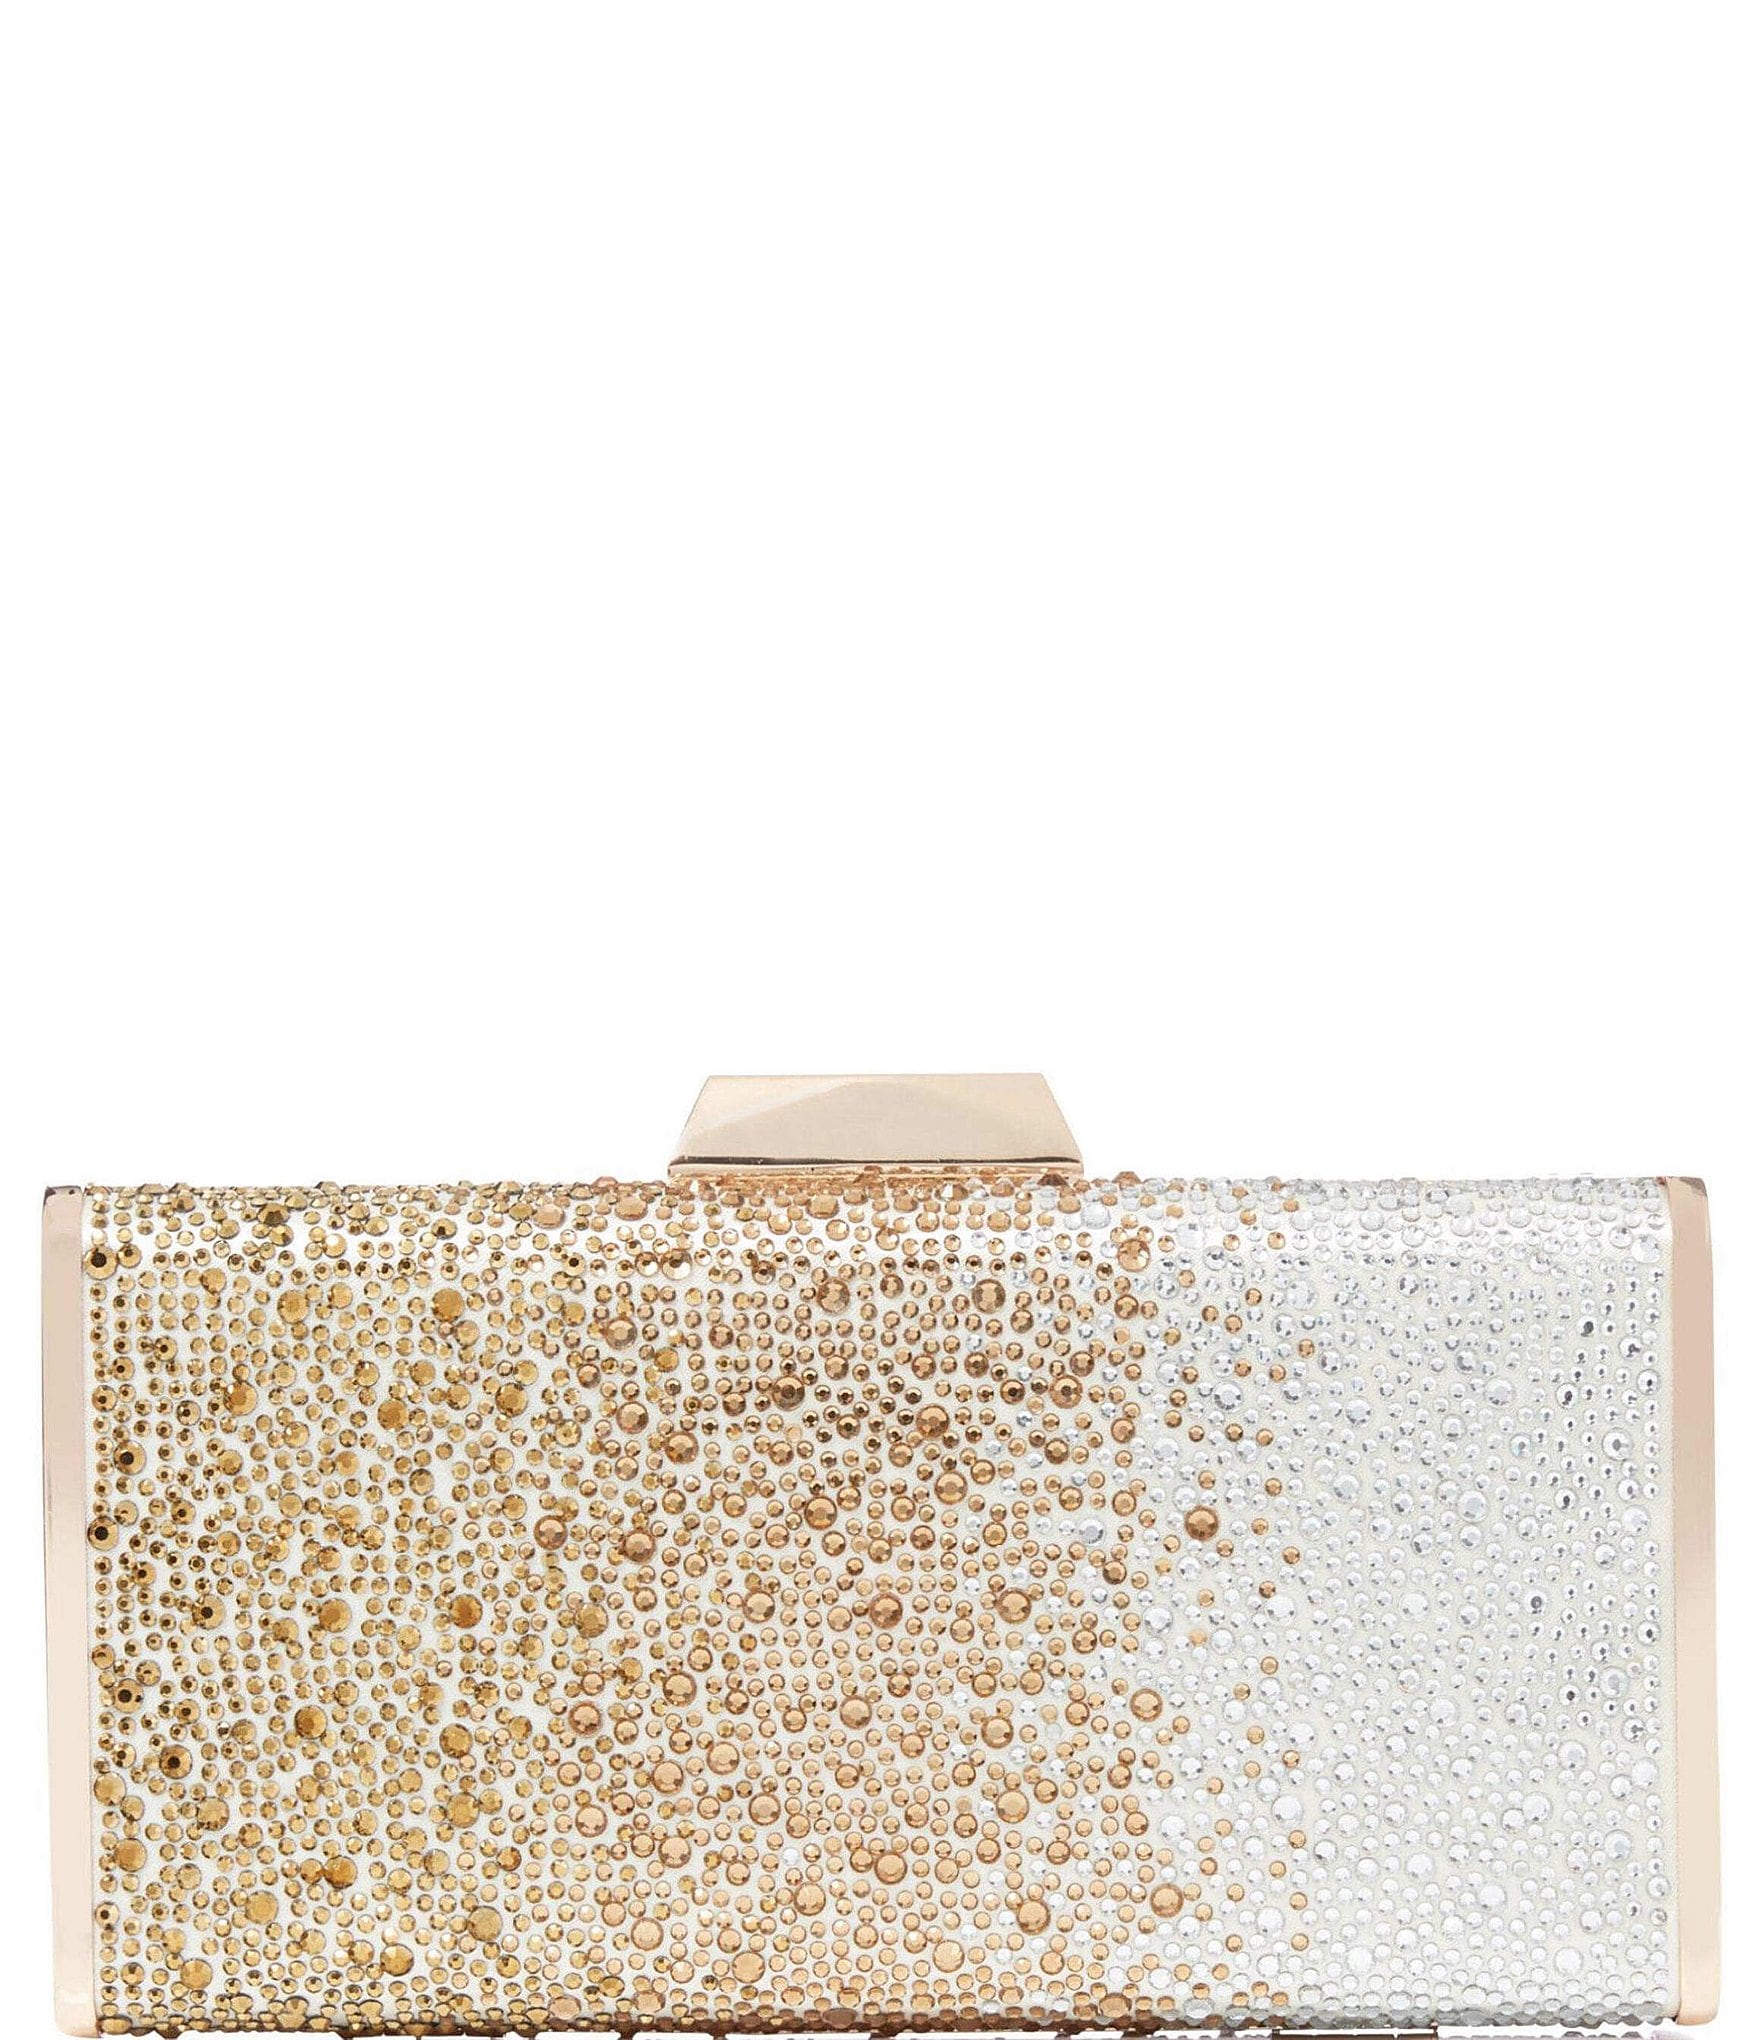 Gold Bridal & Wedding Clutches & Evening Bags